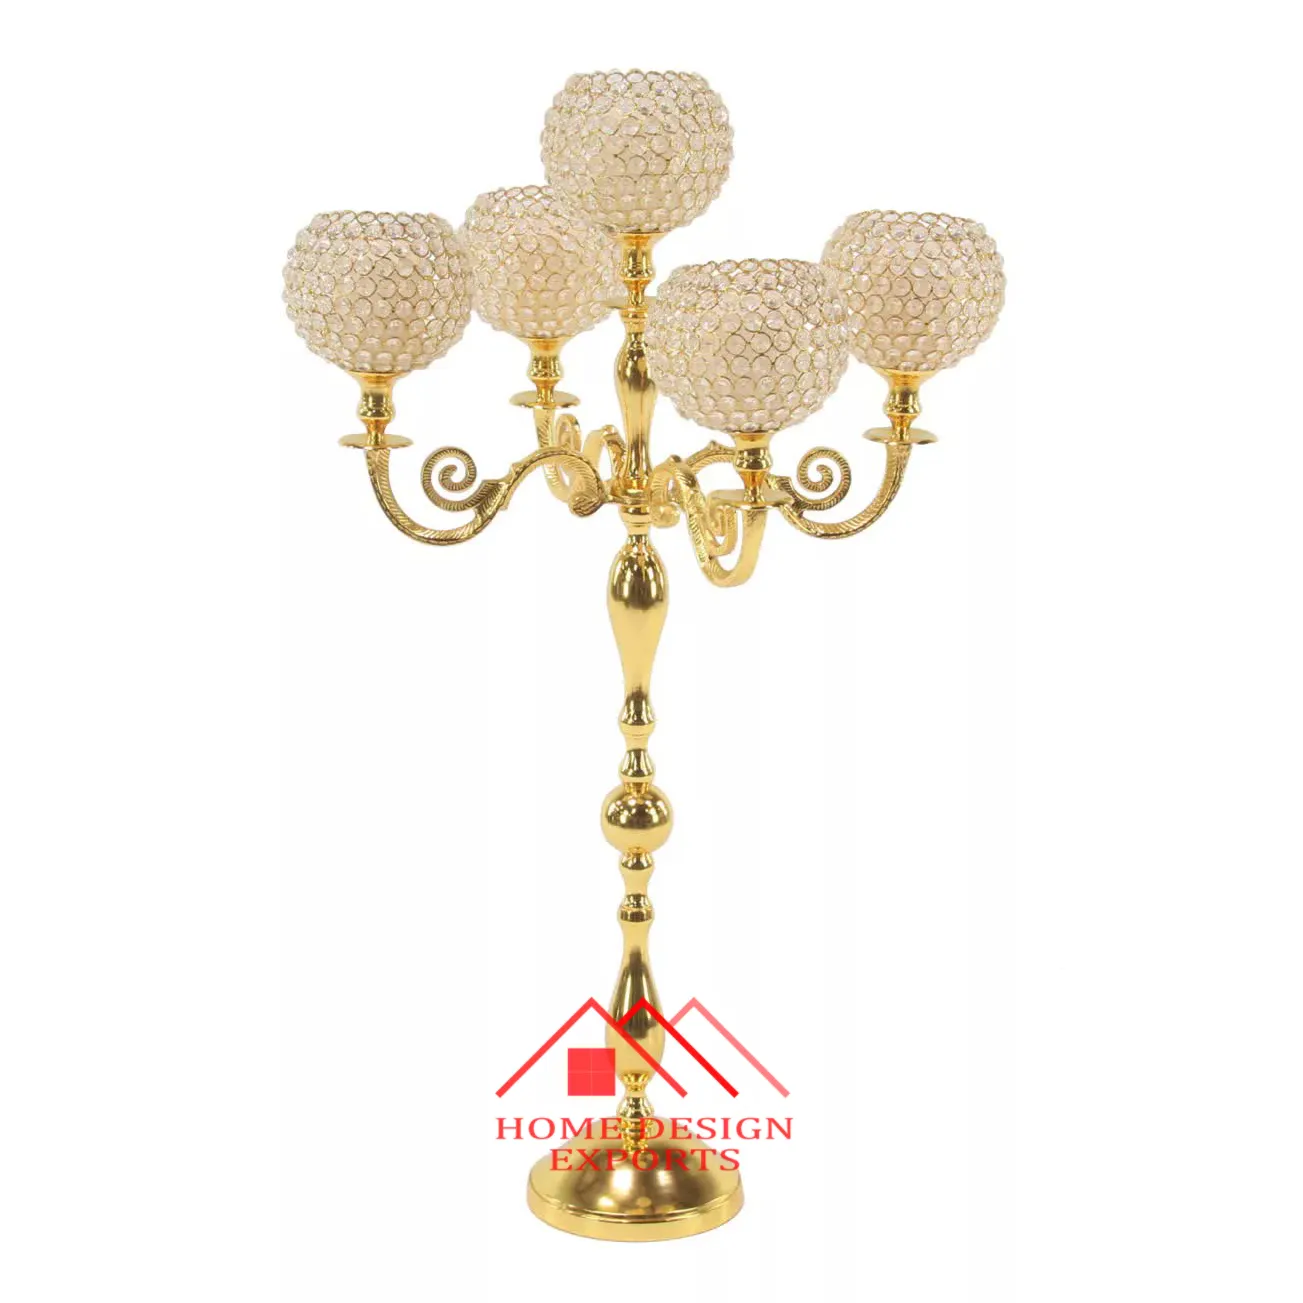 Home Decorative Floor Candelabra With Crystal Ball Votive for Living Room Floor Centerpieces Unique Candelabra for Hotels